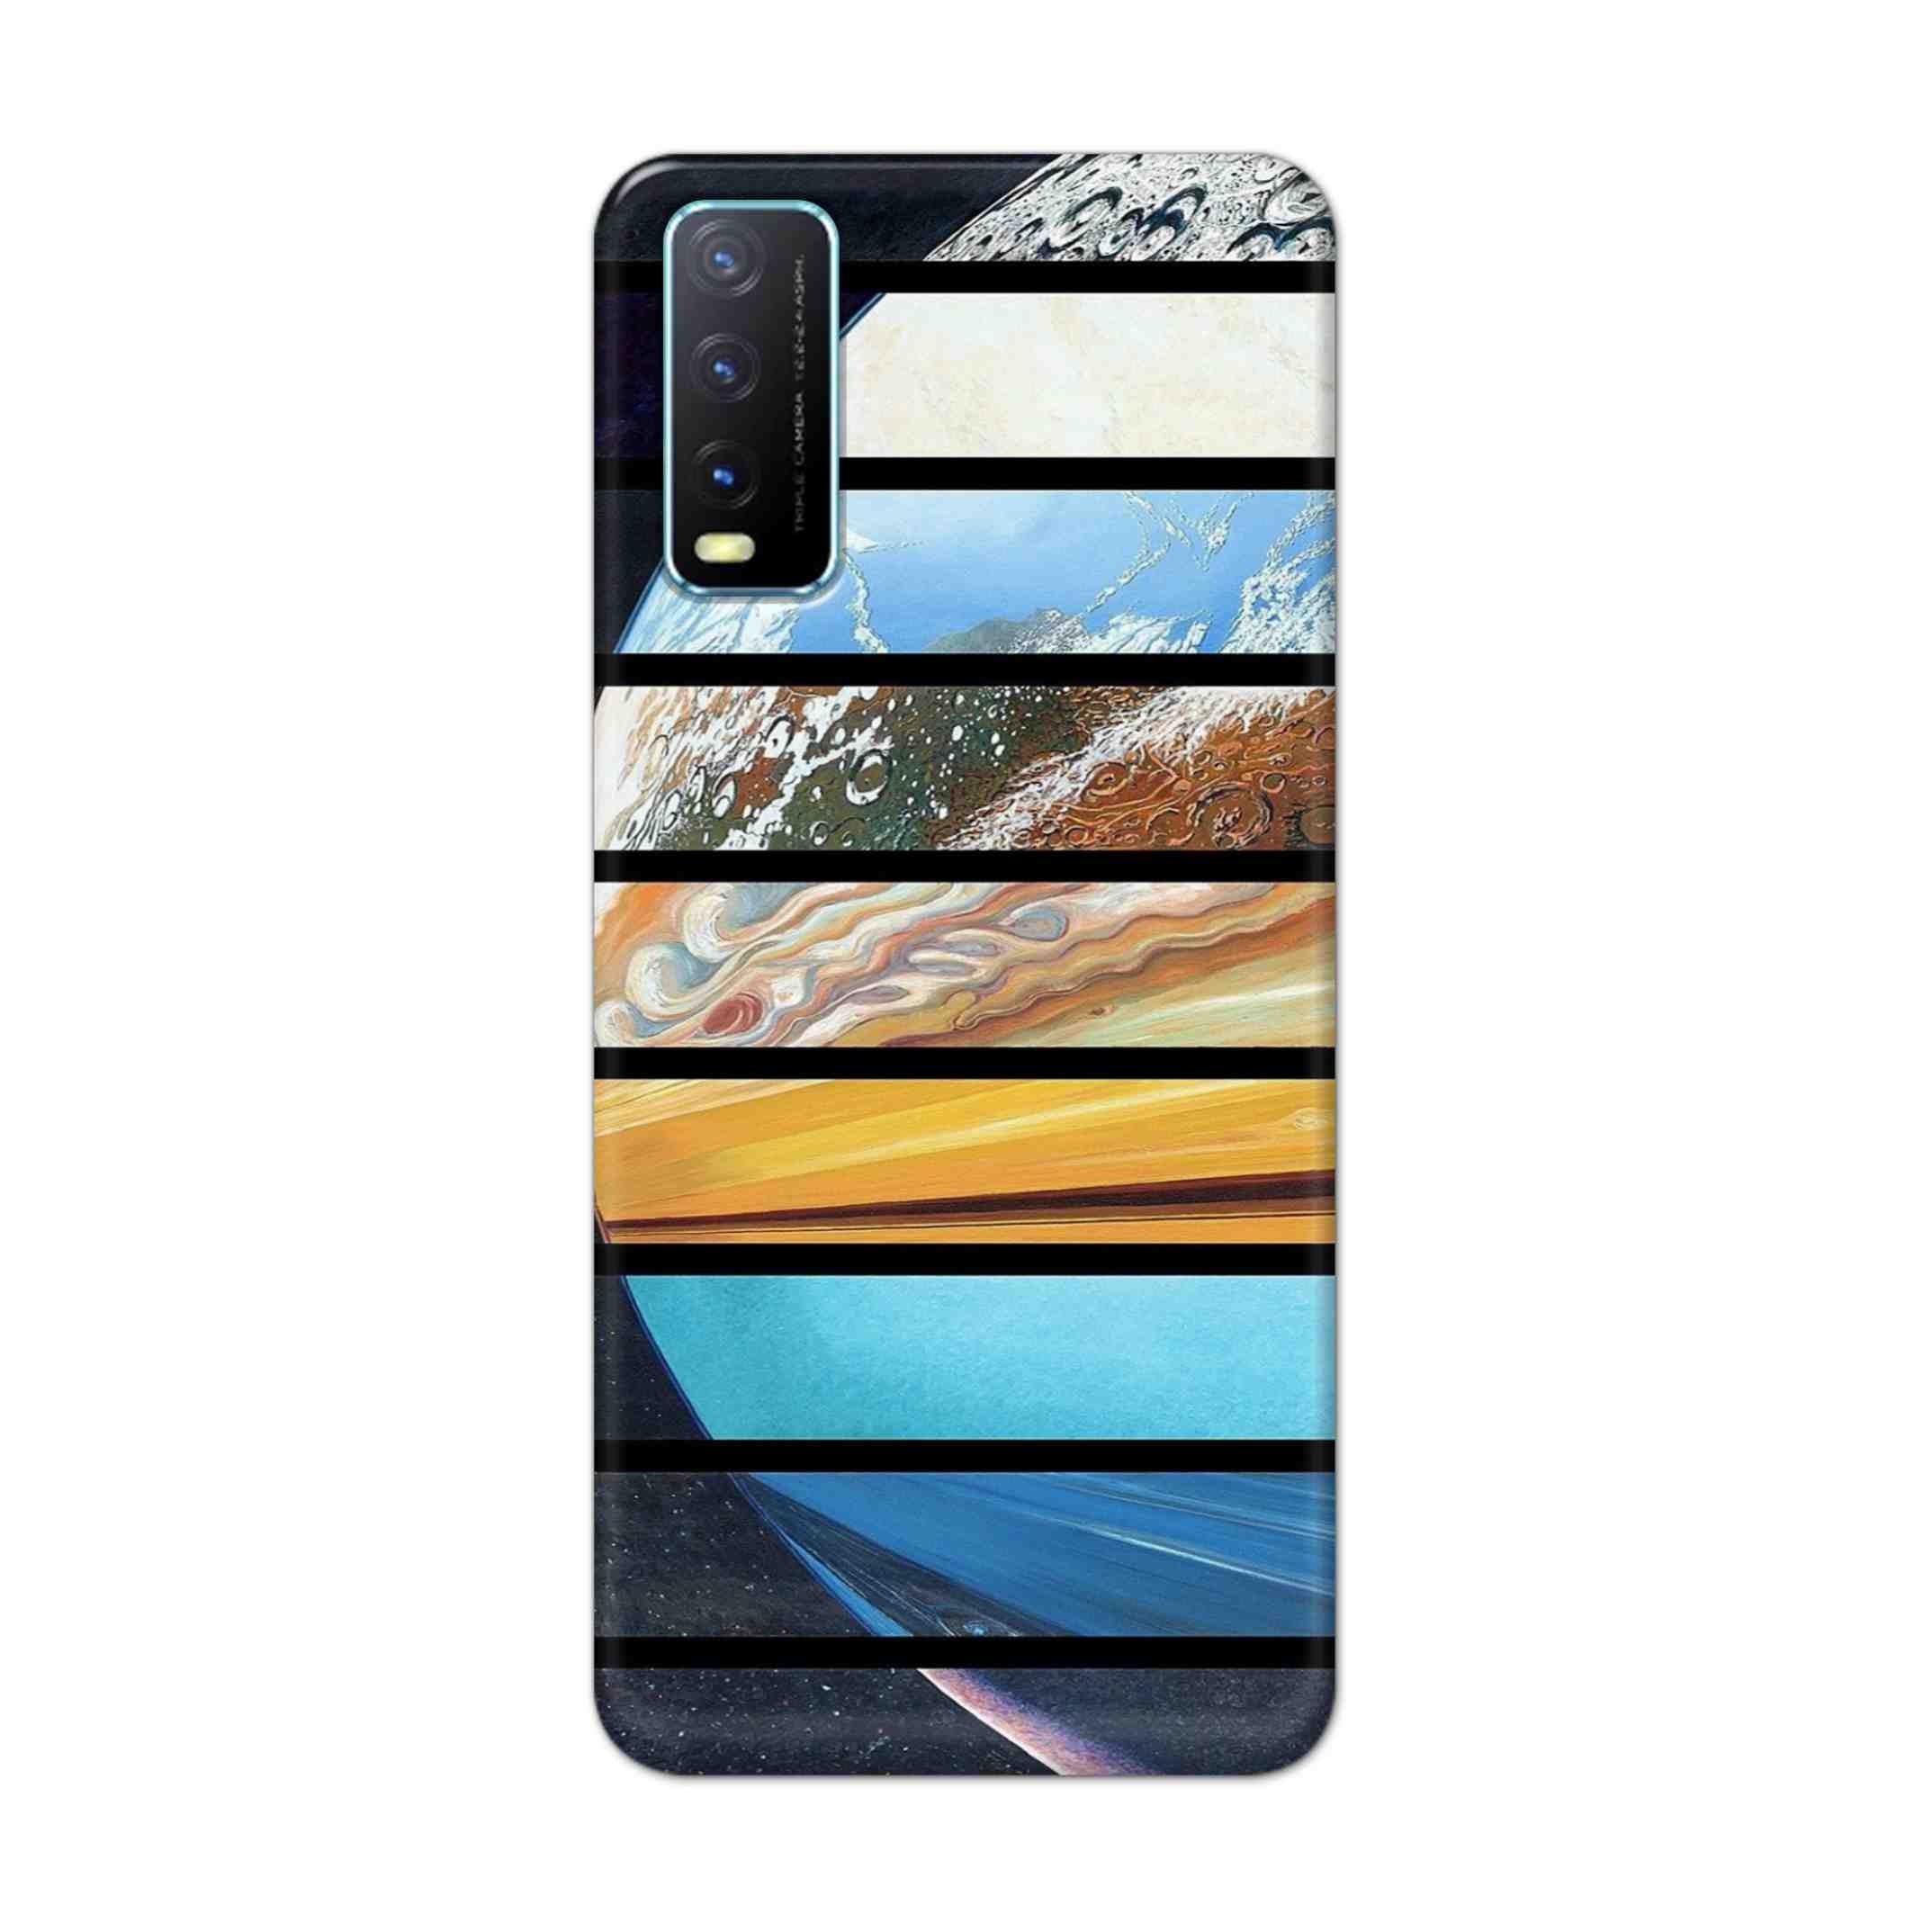 Buy Colourful Earth Hard Back Mobile Phone Case Cover For Vivo Y20 Online